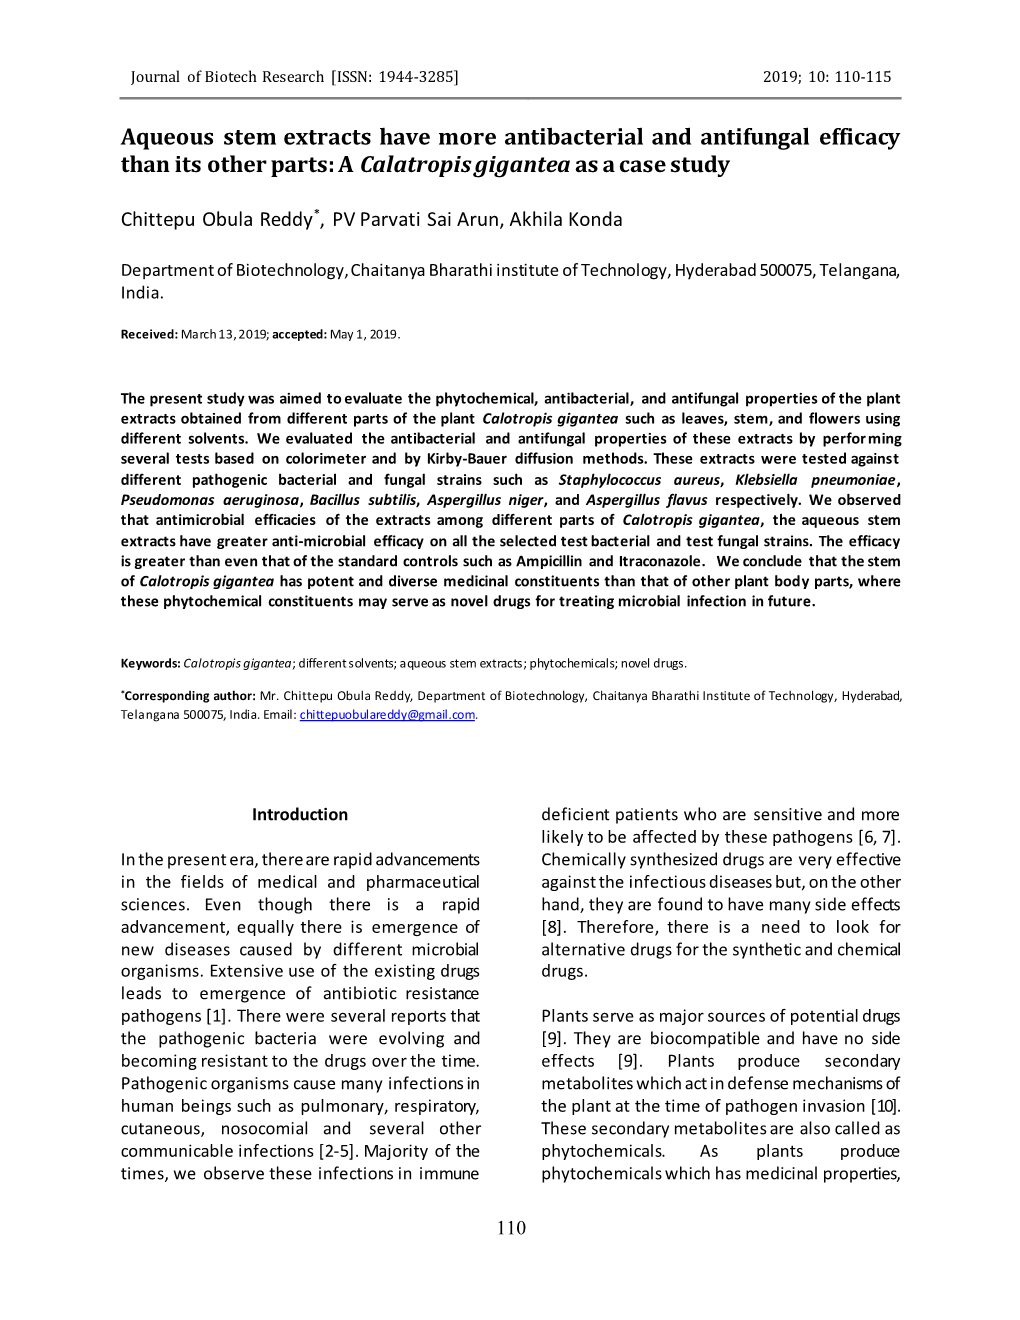 Aqueous Stem Extracts Have More Antibacterial and Antifungal Efficacy Than Its Other Parts: a Calatropis Gigantea As a Case Study